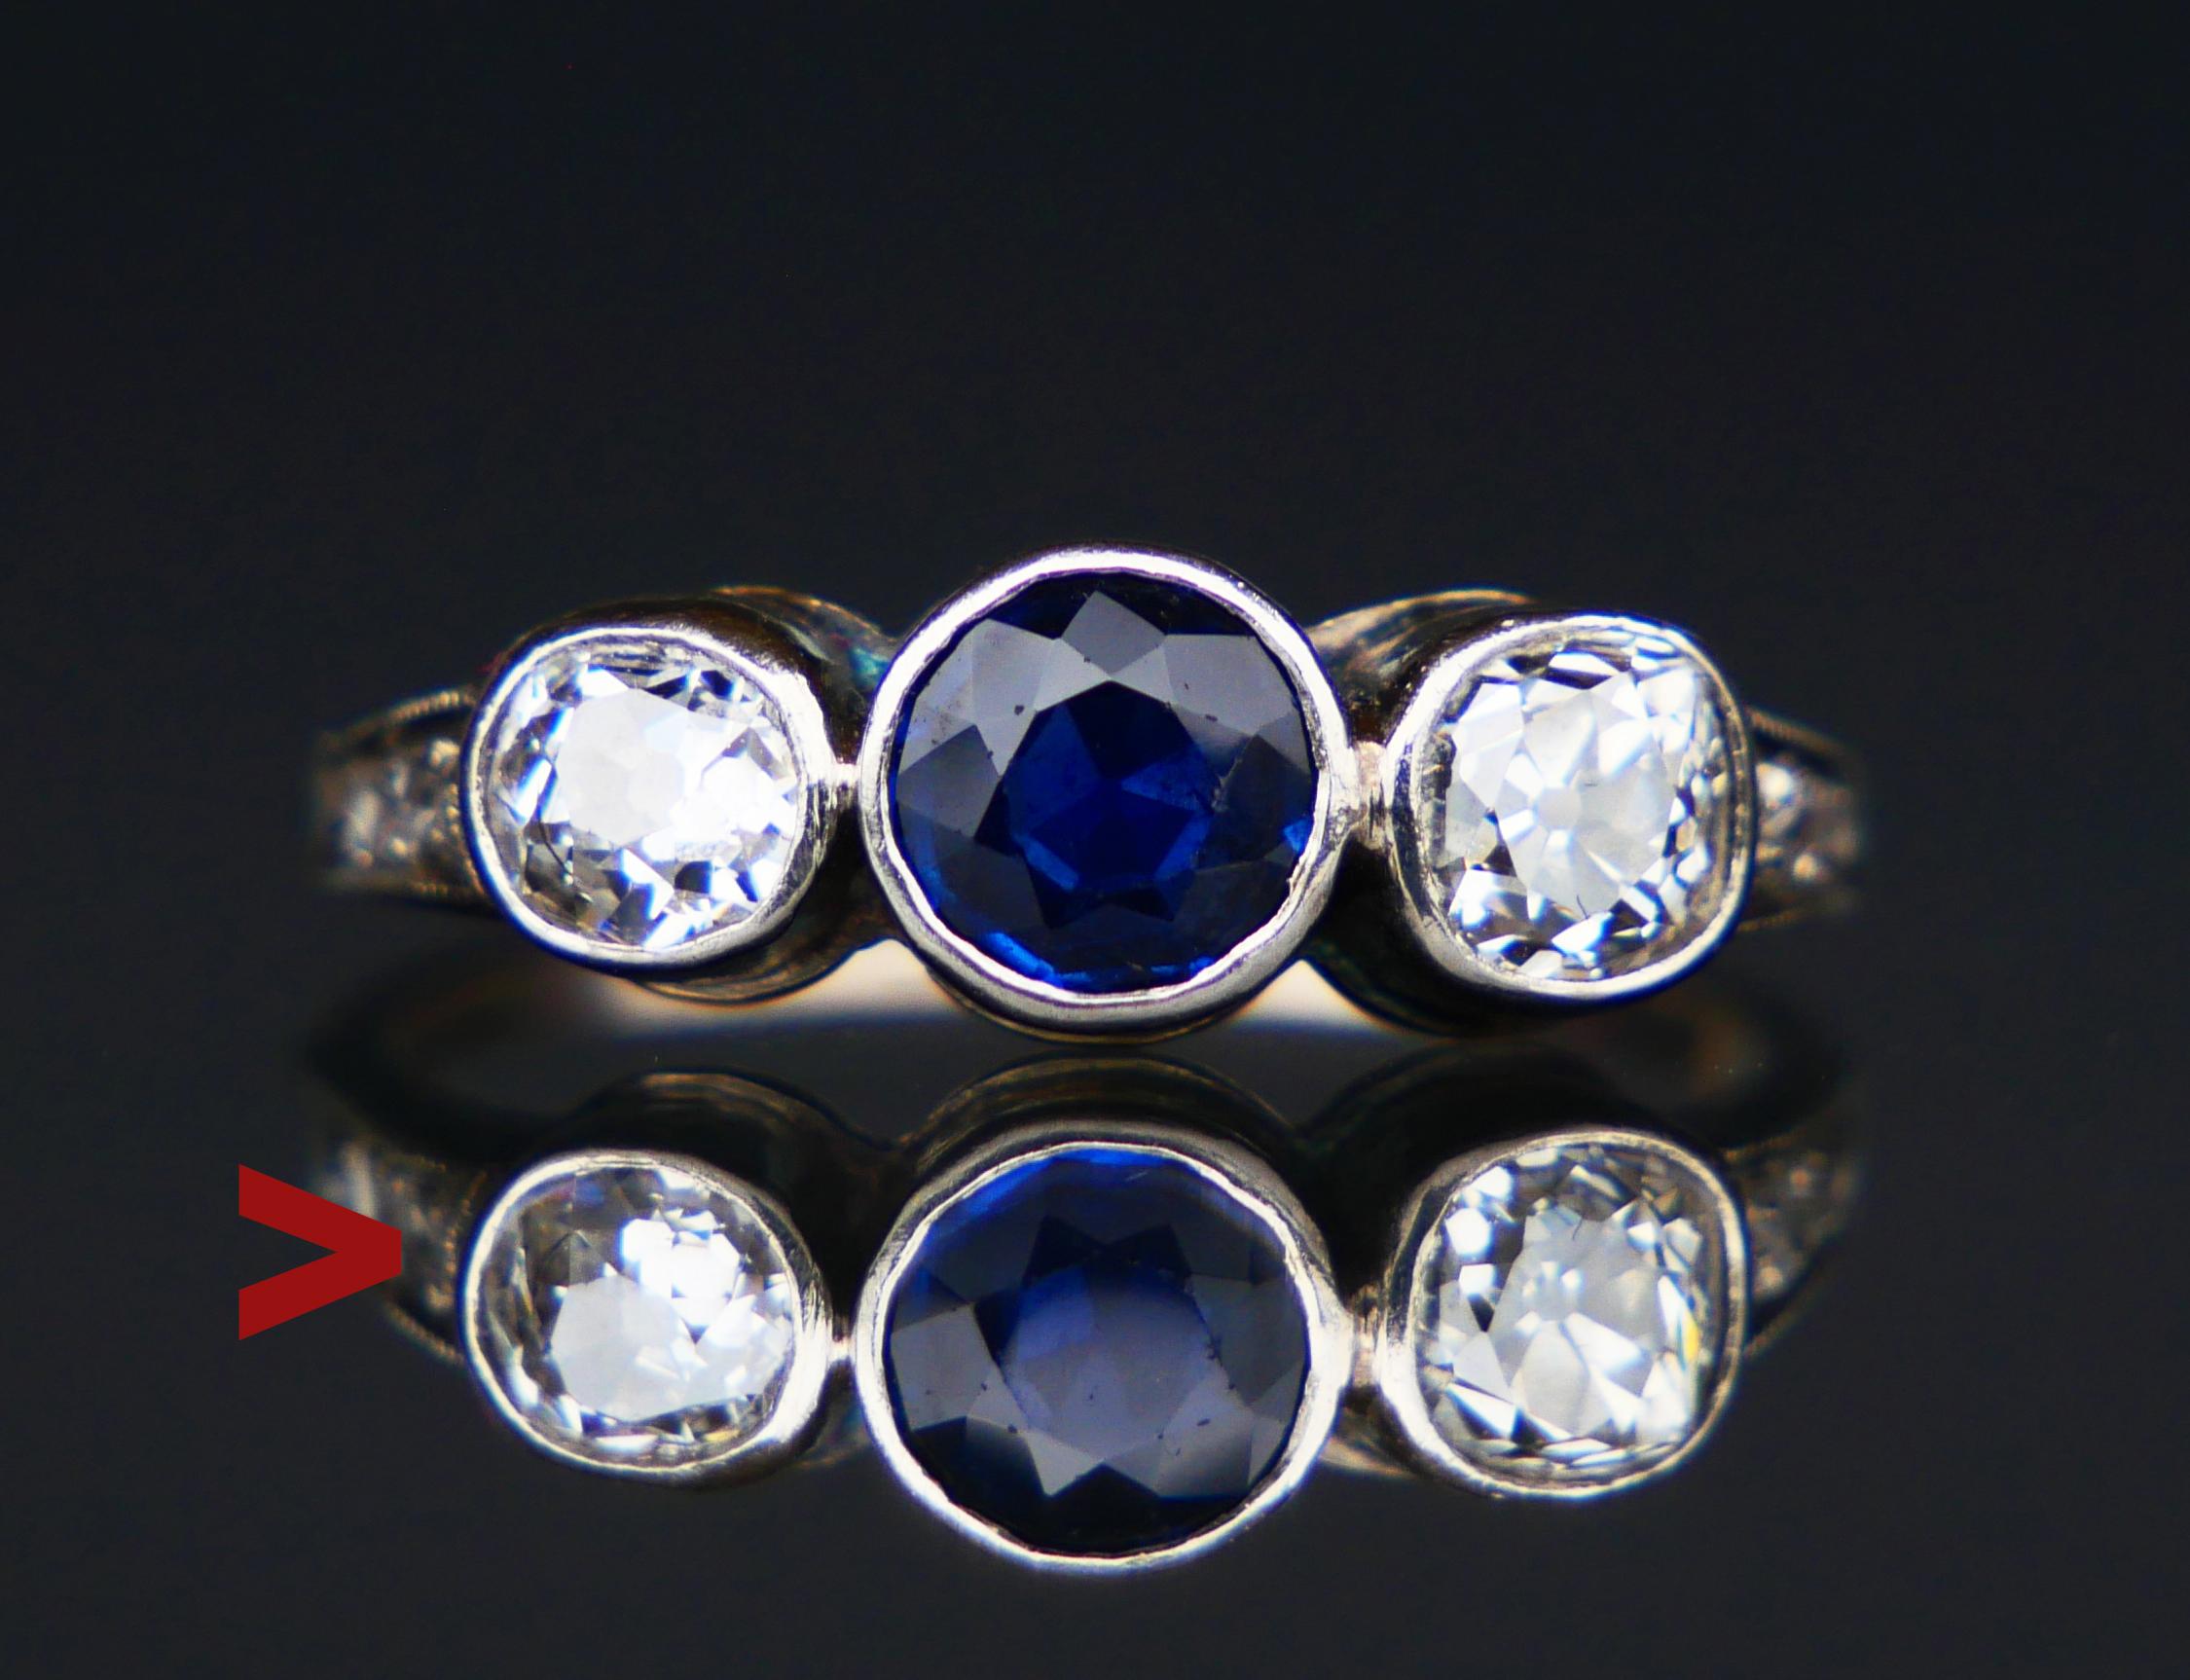 Beautiful Sapphire and Diamonds Ring made ca.1930s - 1950s.
Not hallmarked, metal tested solid 18K White Gold.

Crown: 15.5mm x 5.8mm x 3.05mm in depth.
Old Diamond cut natural Sapphire stone of medium intensity Blue color Ø 5mm x 2.35 mm deep /